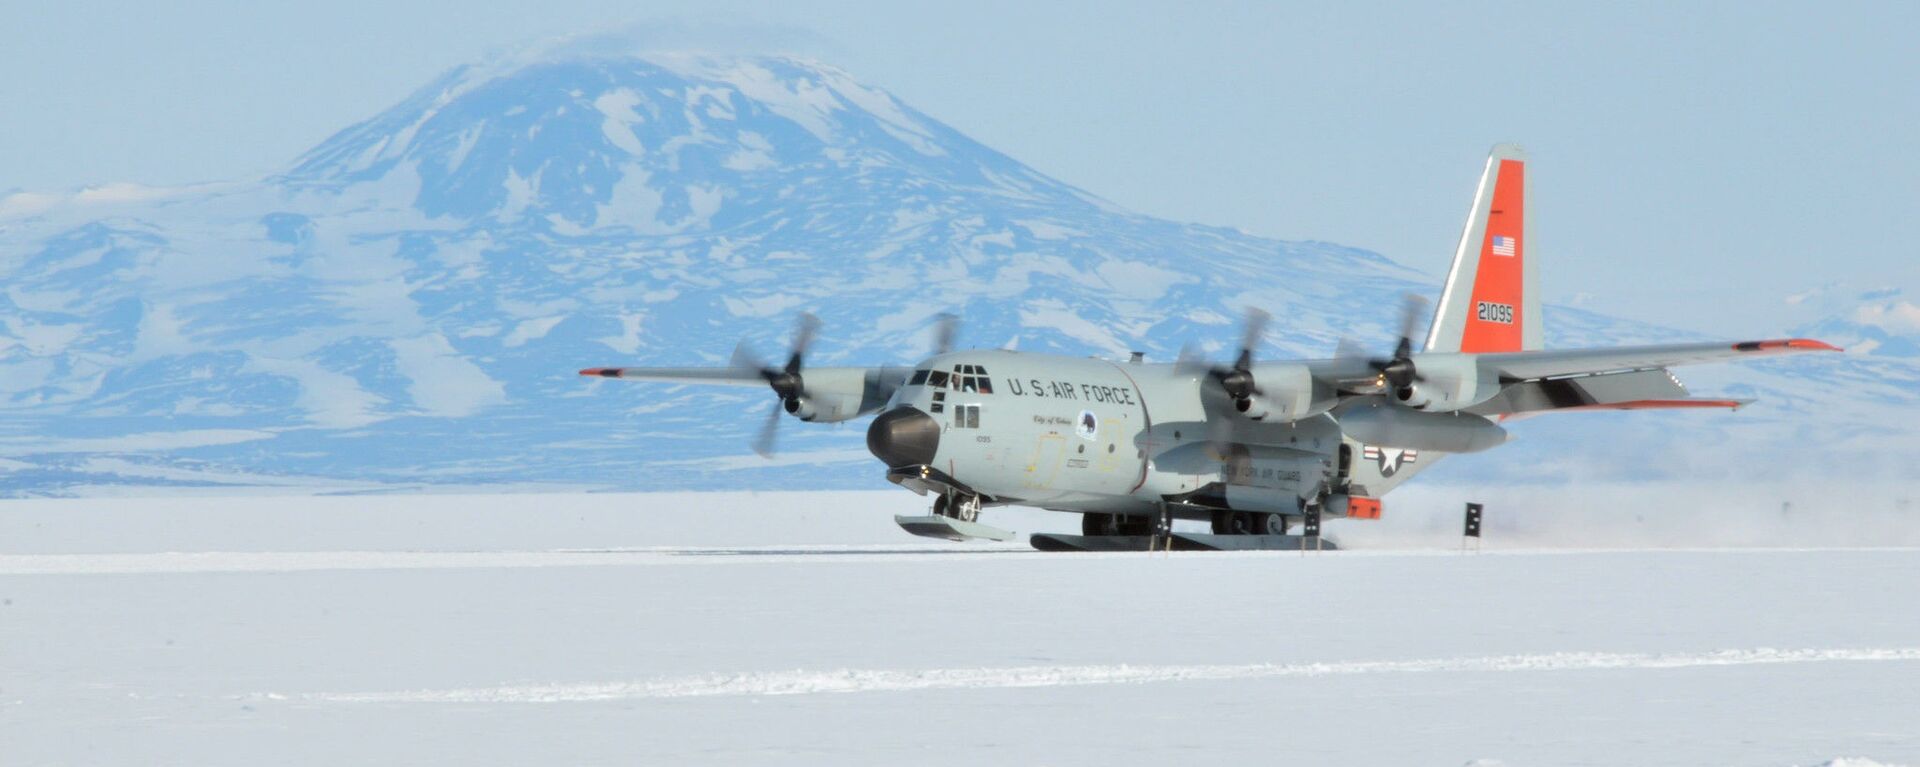 An LC-130 Skibird from the New York Air National Guard's 109th Airlift Wing in Scoita, New York, at Camp Raven, Greenland, on June 28, 2016 - Sputnik International, 1920, 23.05.2022